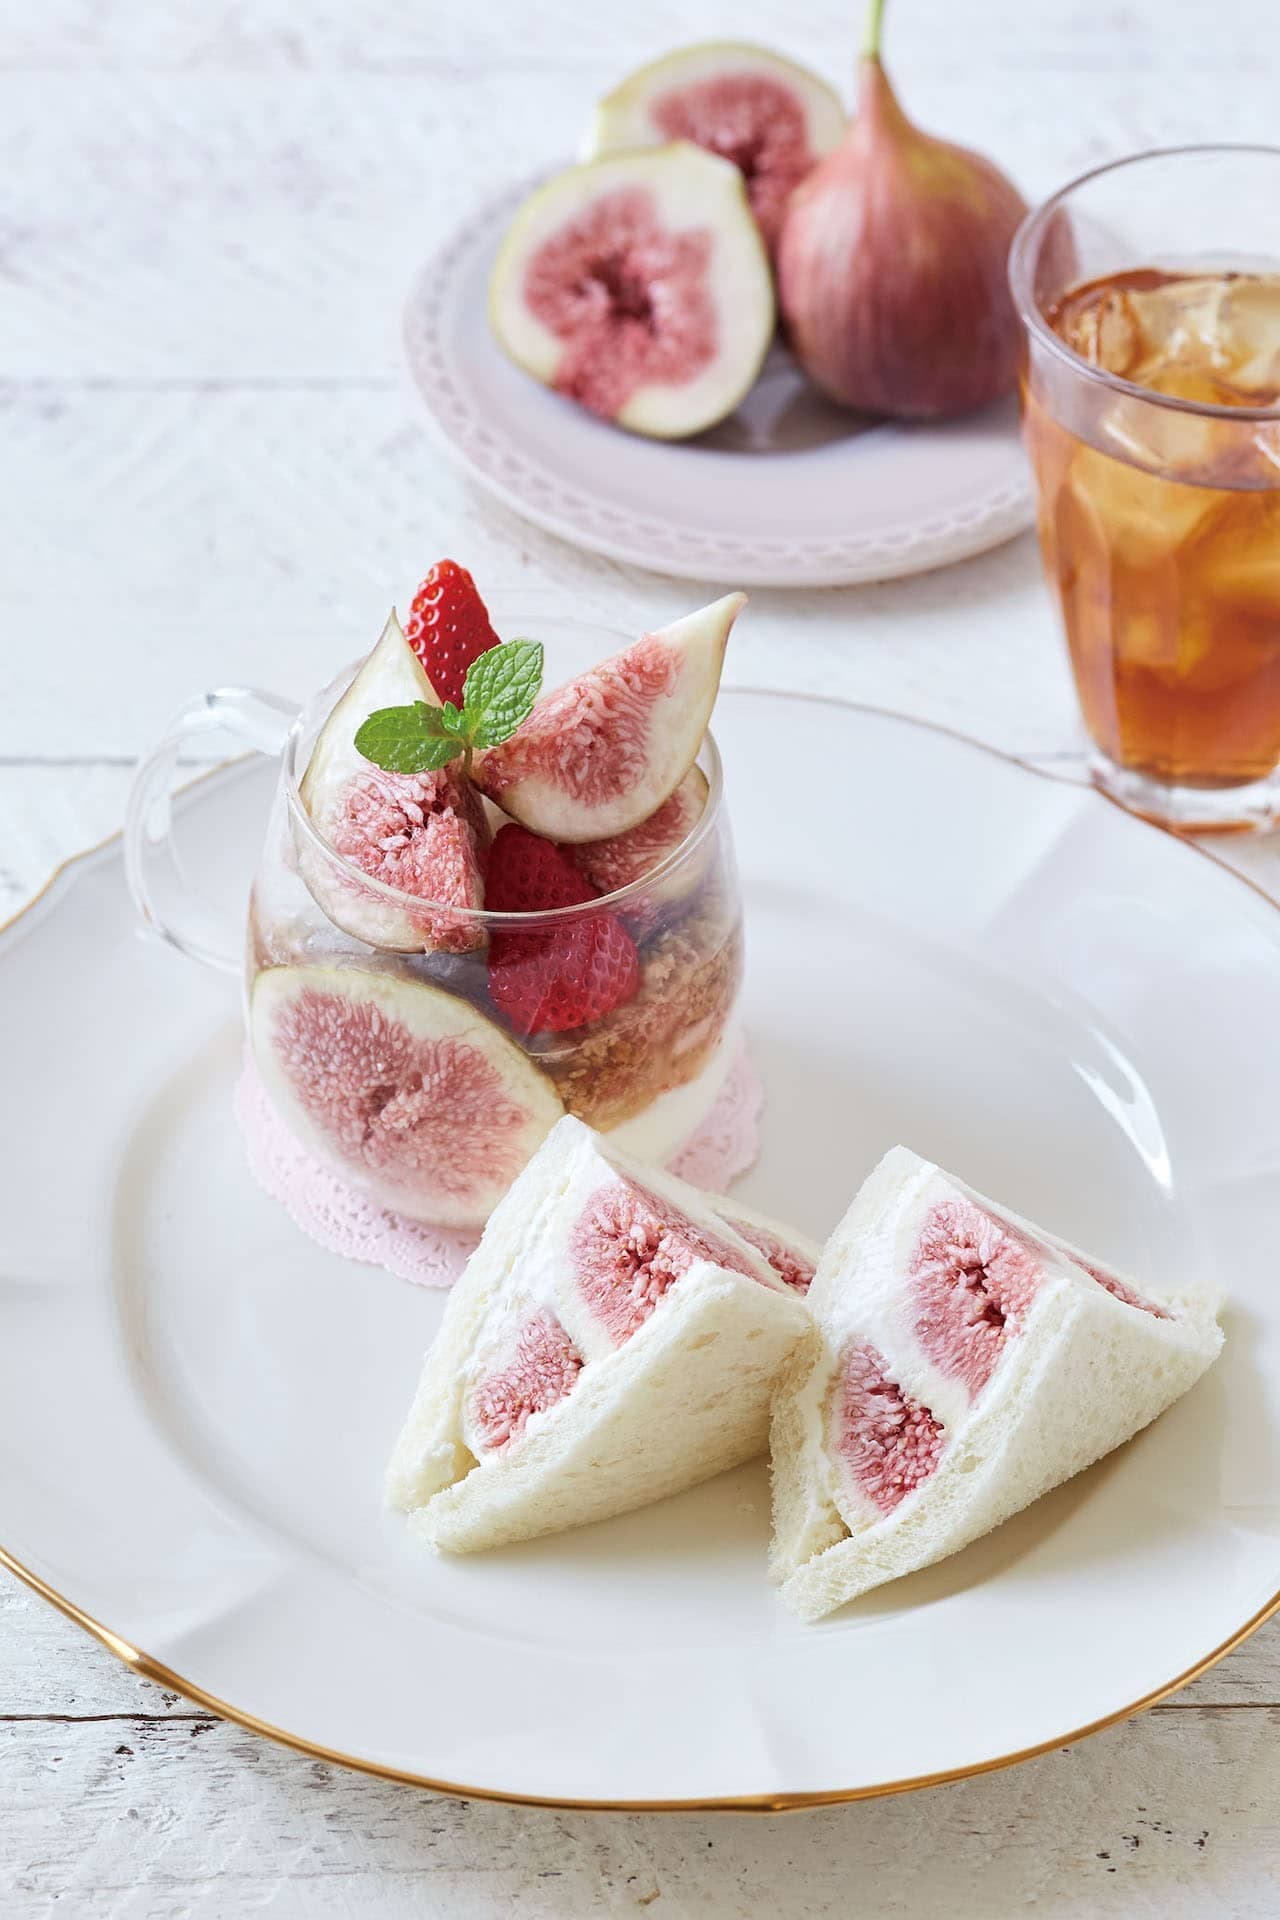 Afternoon Tea "Aichi Prefecture fig sweets plate".